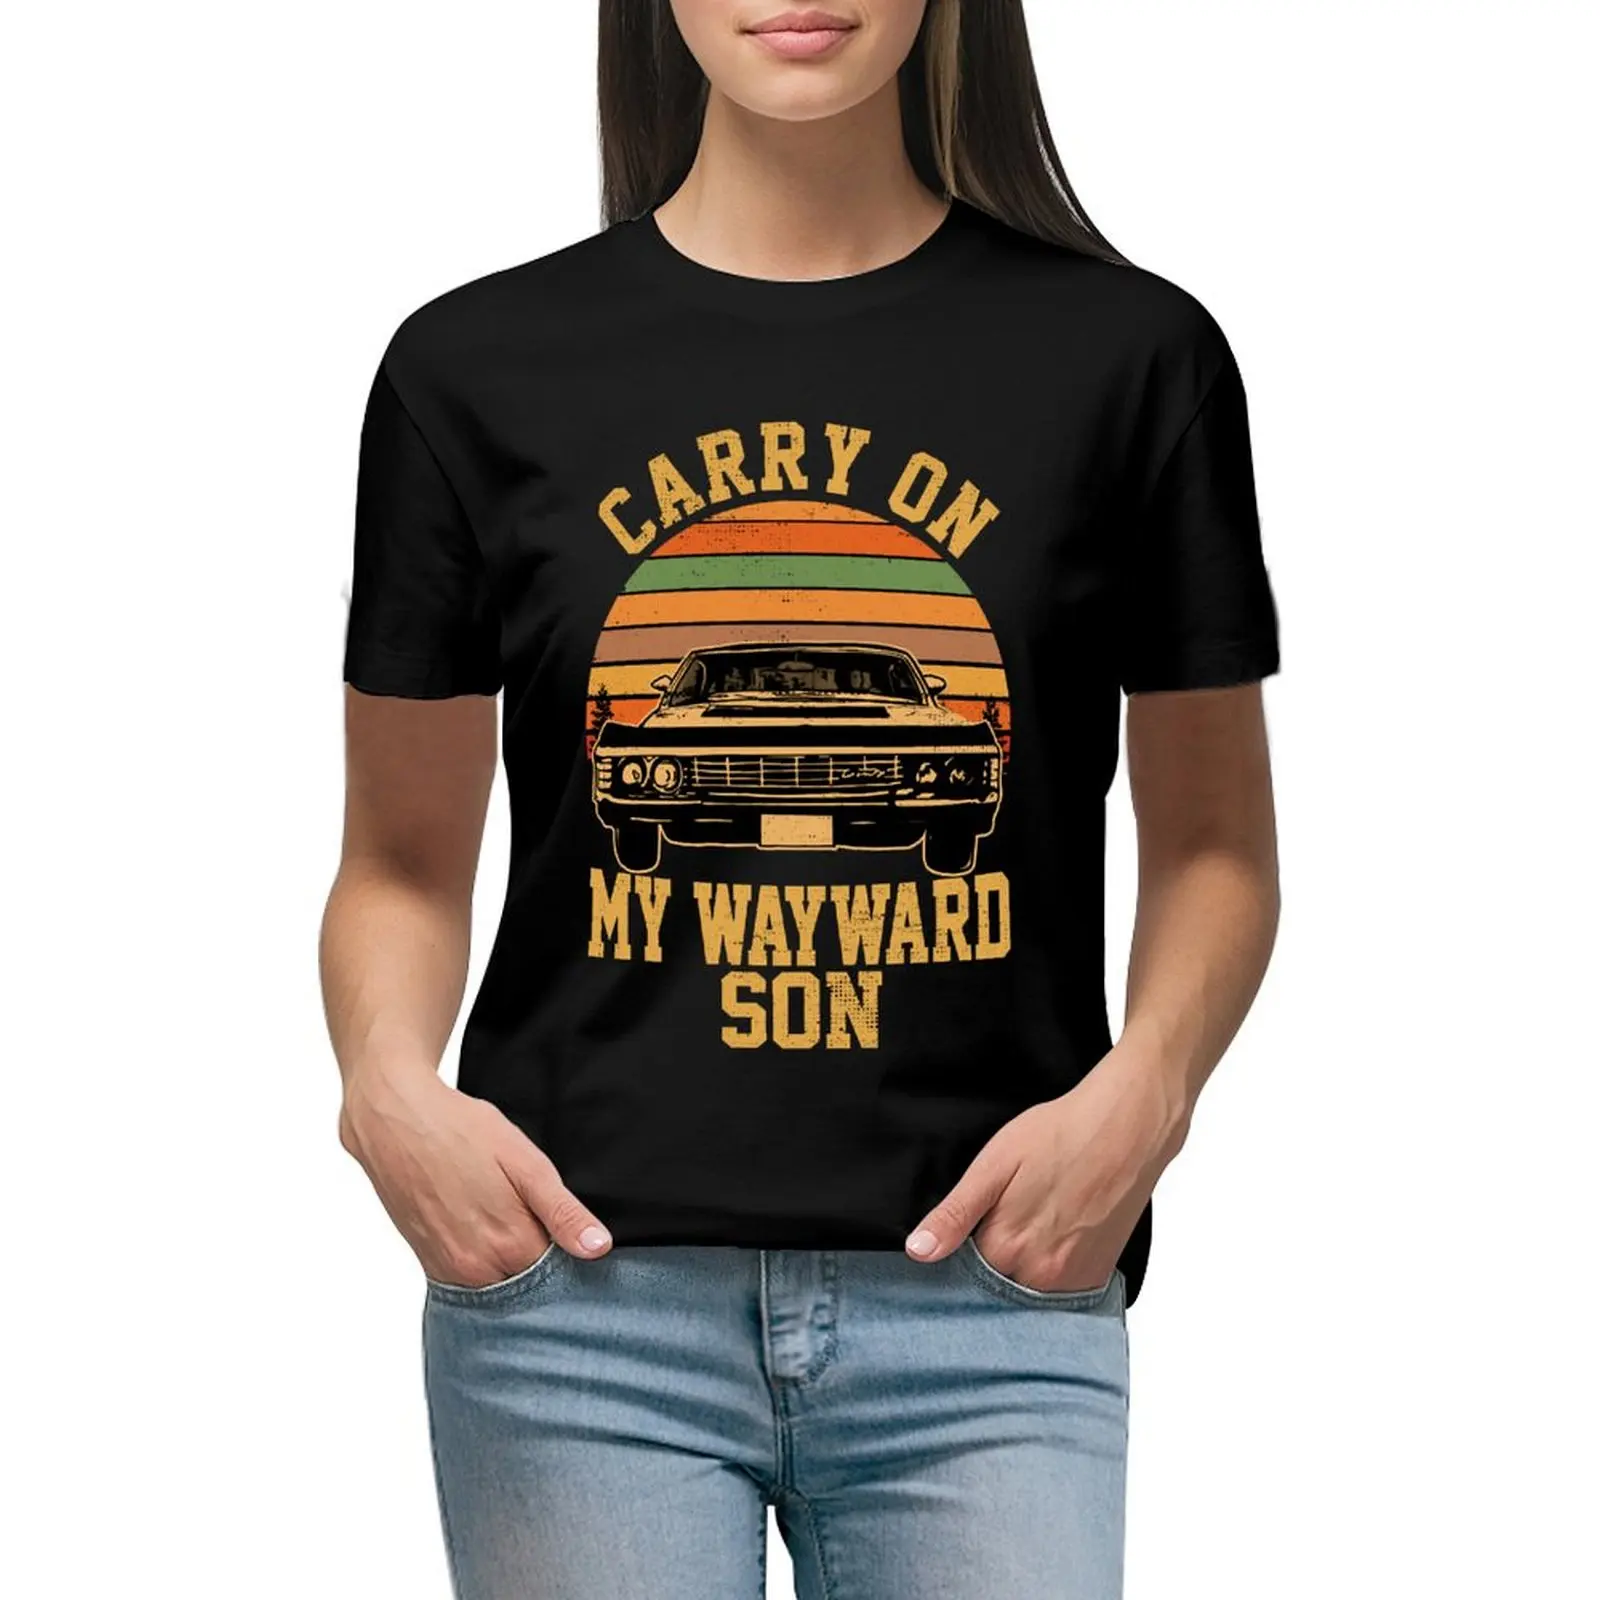 

Day Gift Vintage Carry On My Wayward Son Designgift For Everyone T-shirt aesthetic clothes tops Women